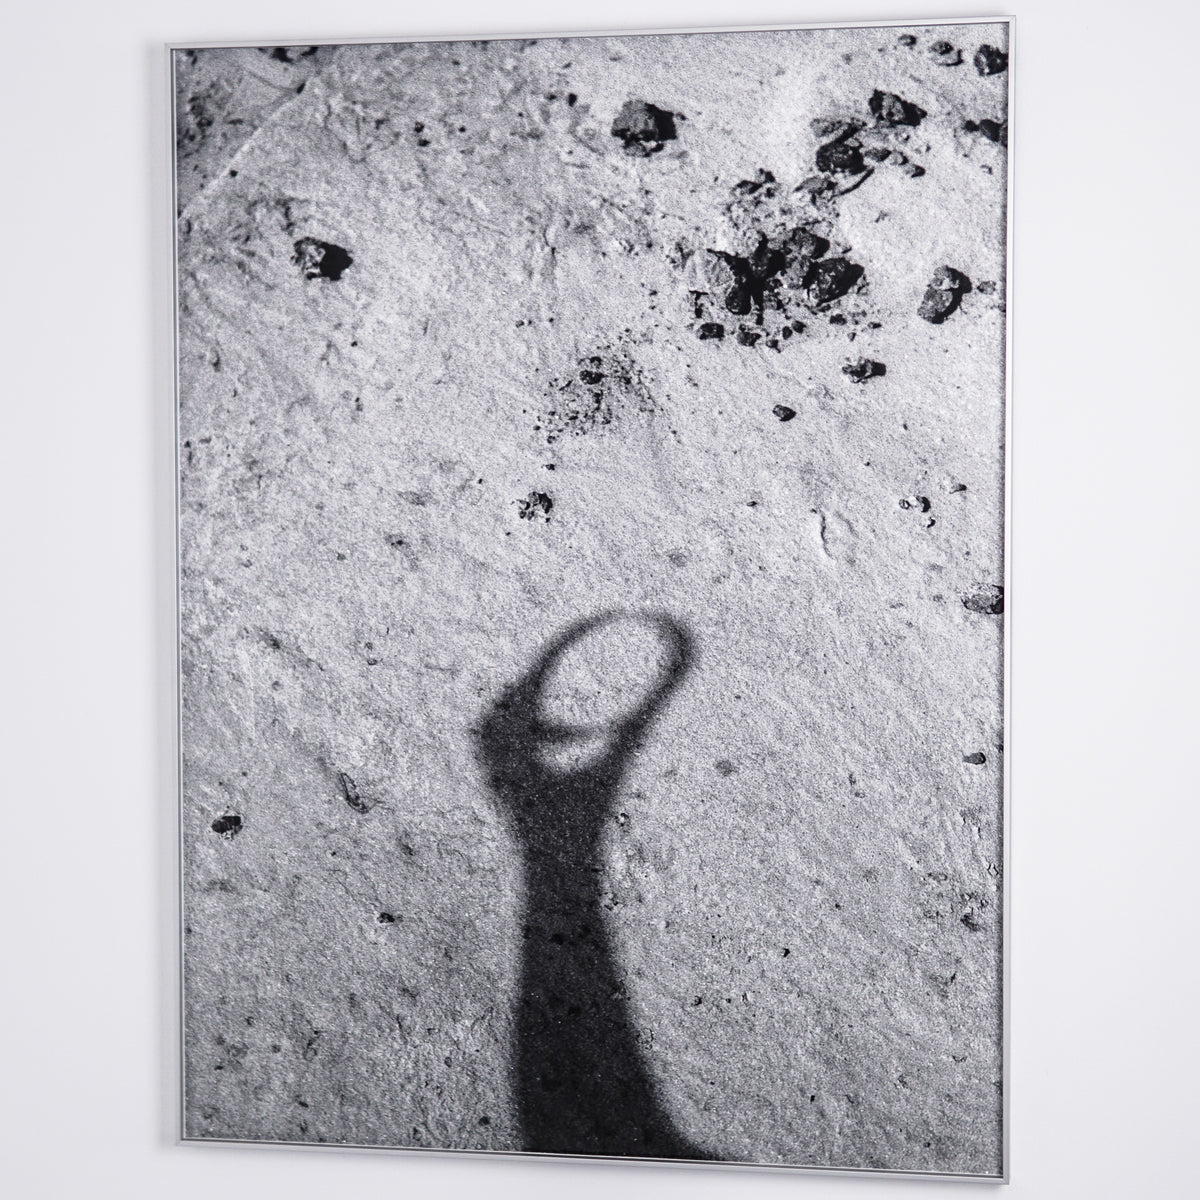 Inês Mendes Leal | 11 | 2021 | 102 x 76,5 cm | Pigment inkjet print on barite paper | Ungoing sun series